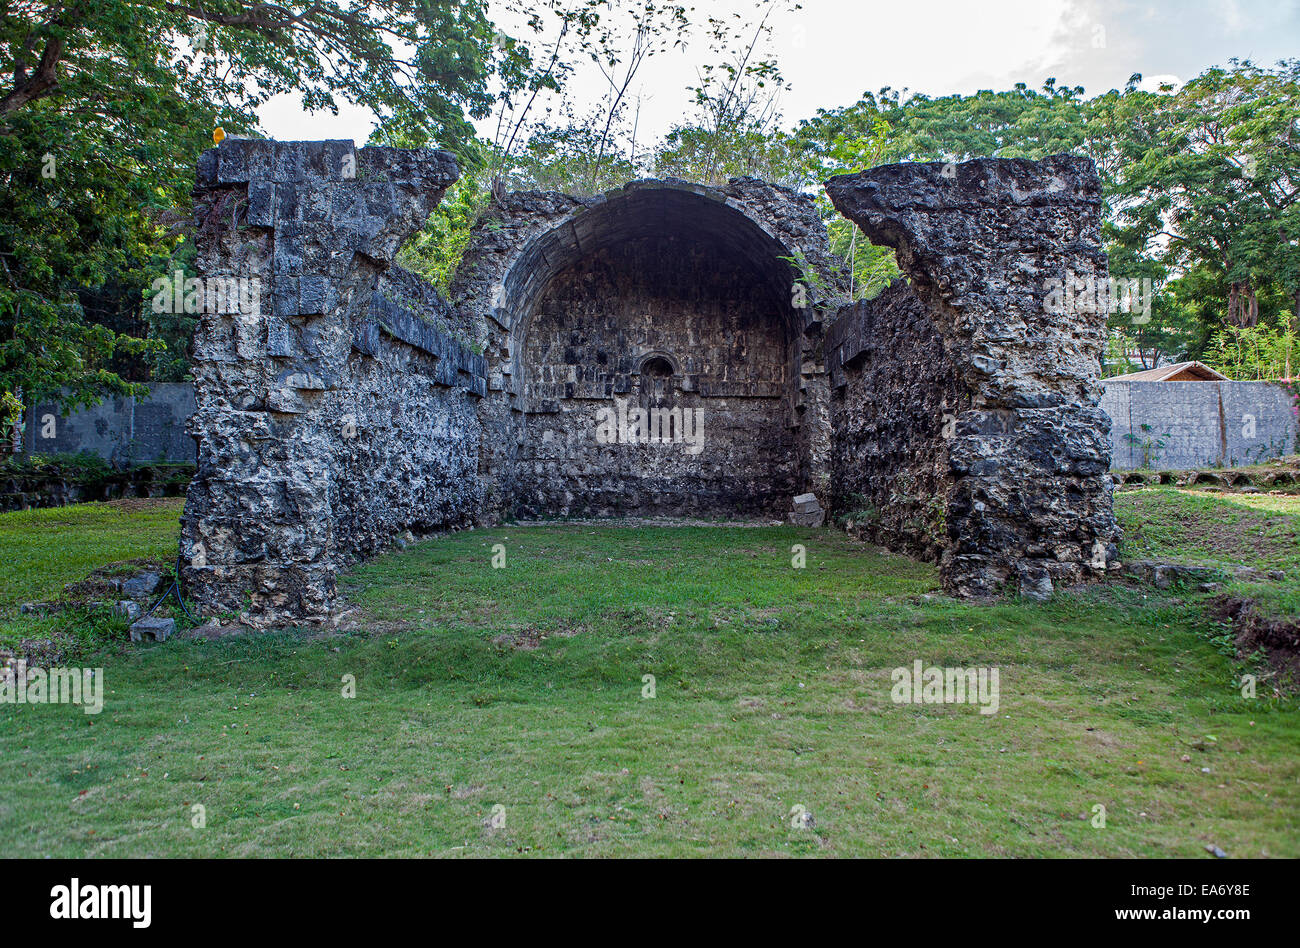 The chapel at the Ermita Ruins in the town of Dimiao, Bohol Island, Philippines. Spanish origin several hundred years old. Stock Photo